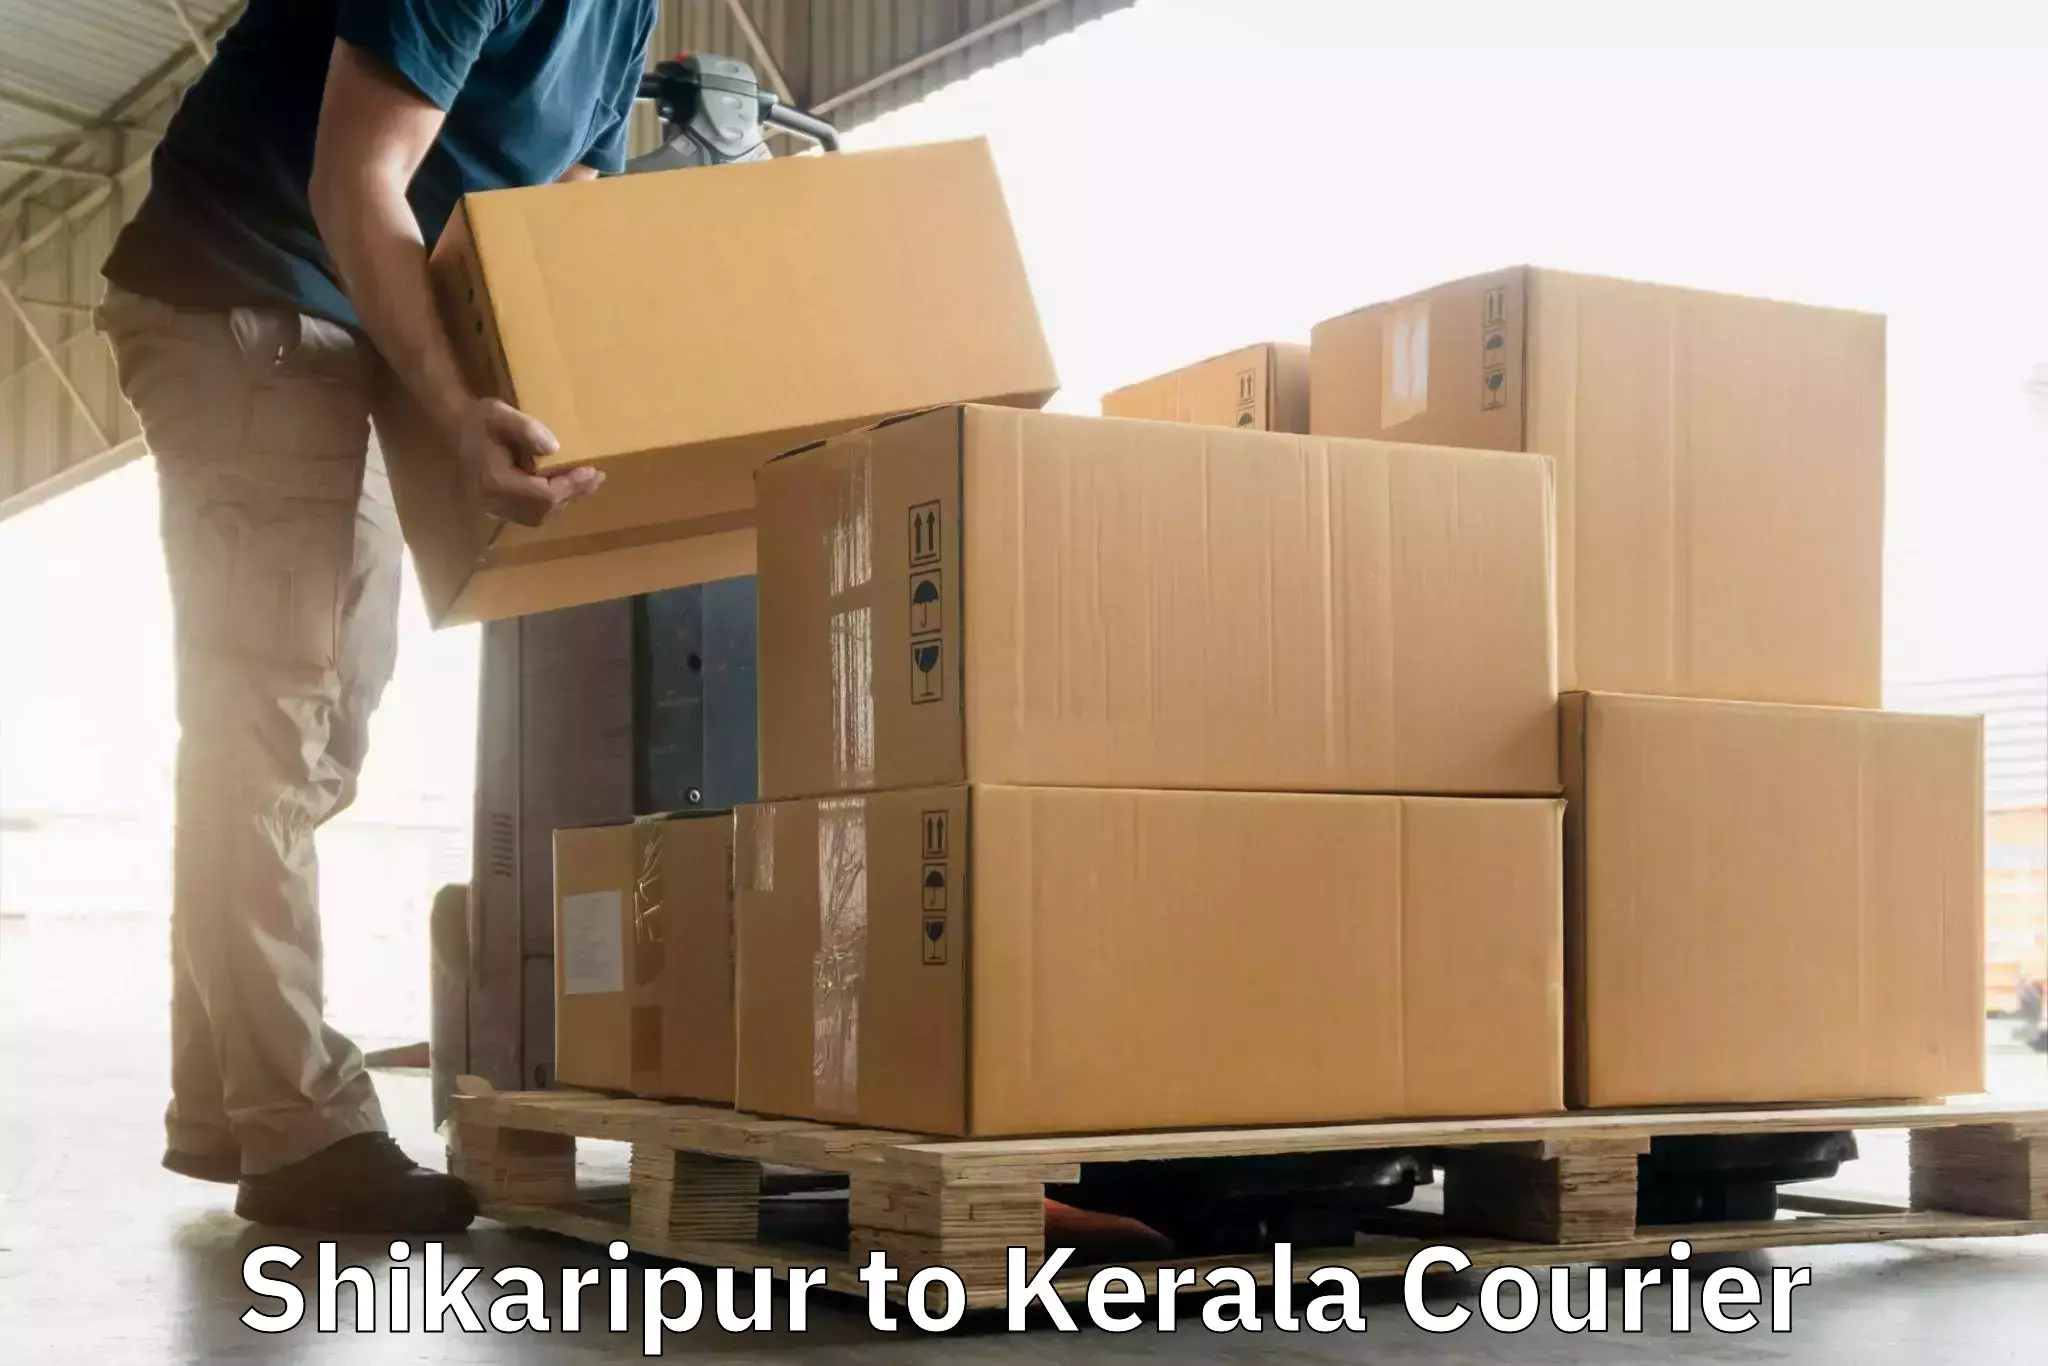 Parcel service for businesses Shikaripur to Palai